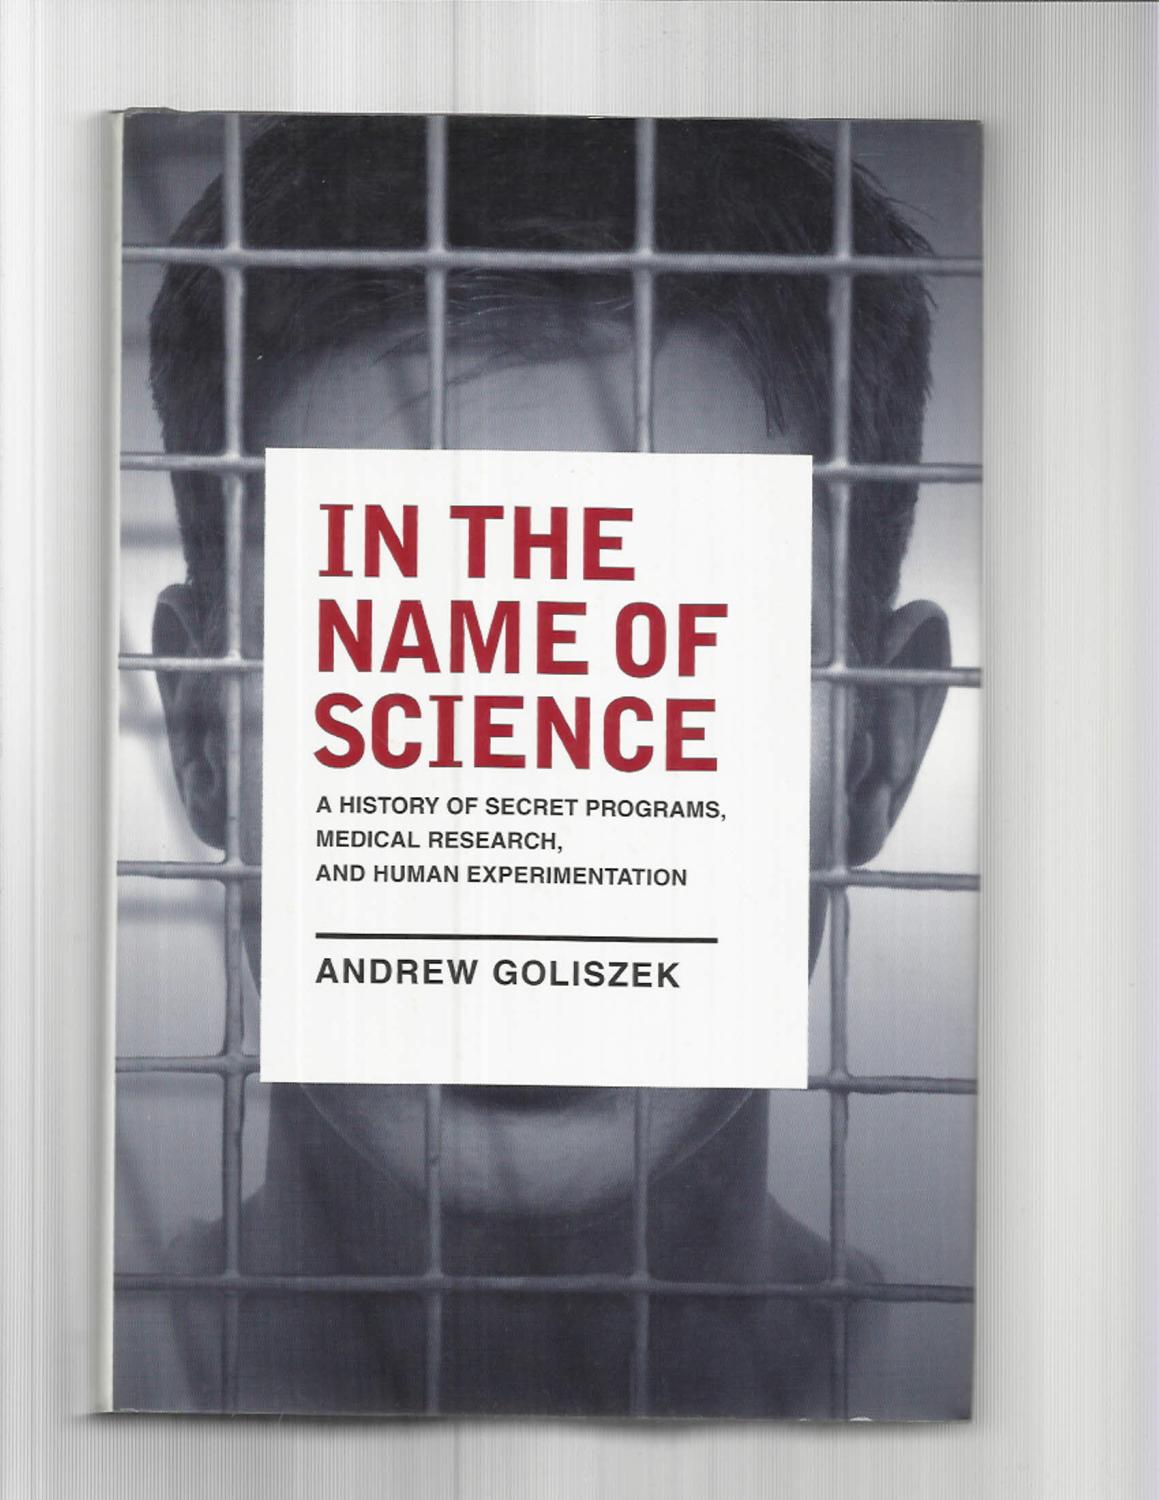 IN THE NAME OF SCIENCE: A History Of Secret Programs, Medical Research, And Human Experimentation. - Goliszek, Andrew